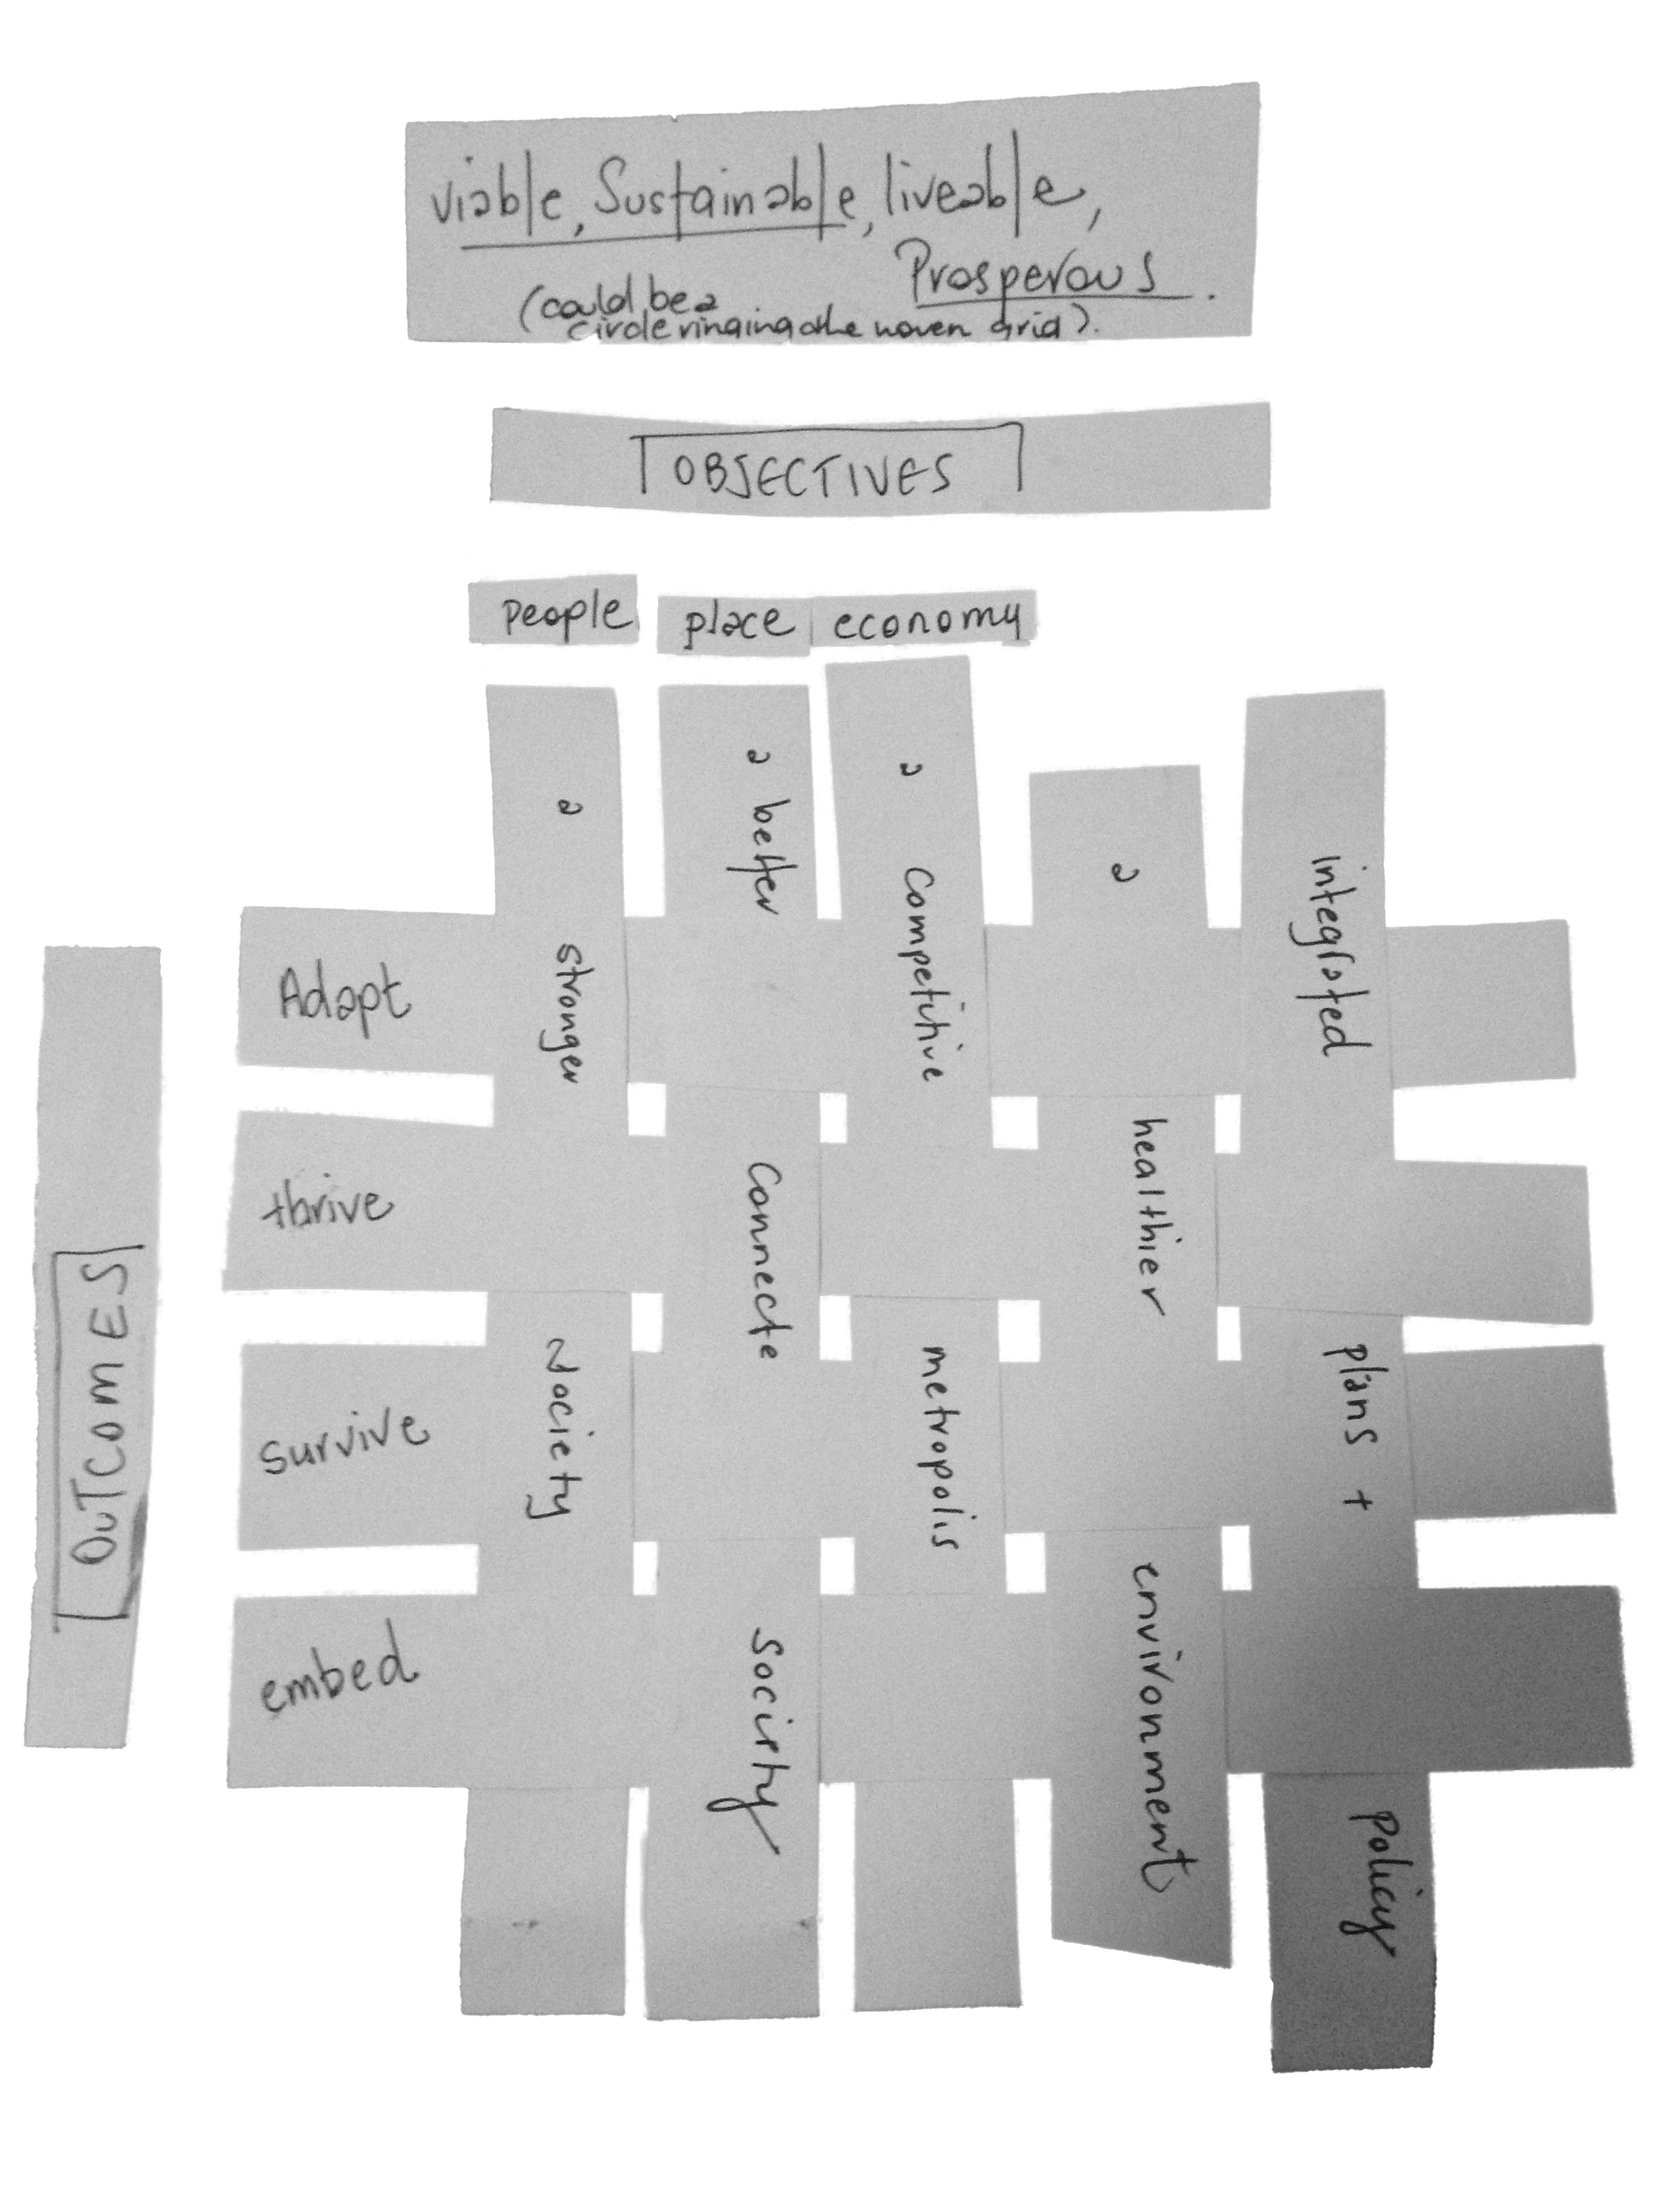 Strips of paper with single words written on them layered into a cross-hatch with axis headings of 'obejctives' and 'outcomes'.